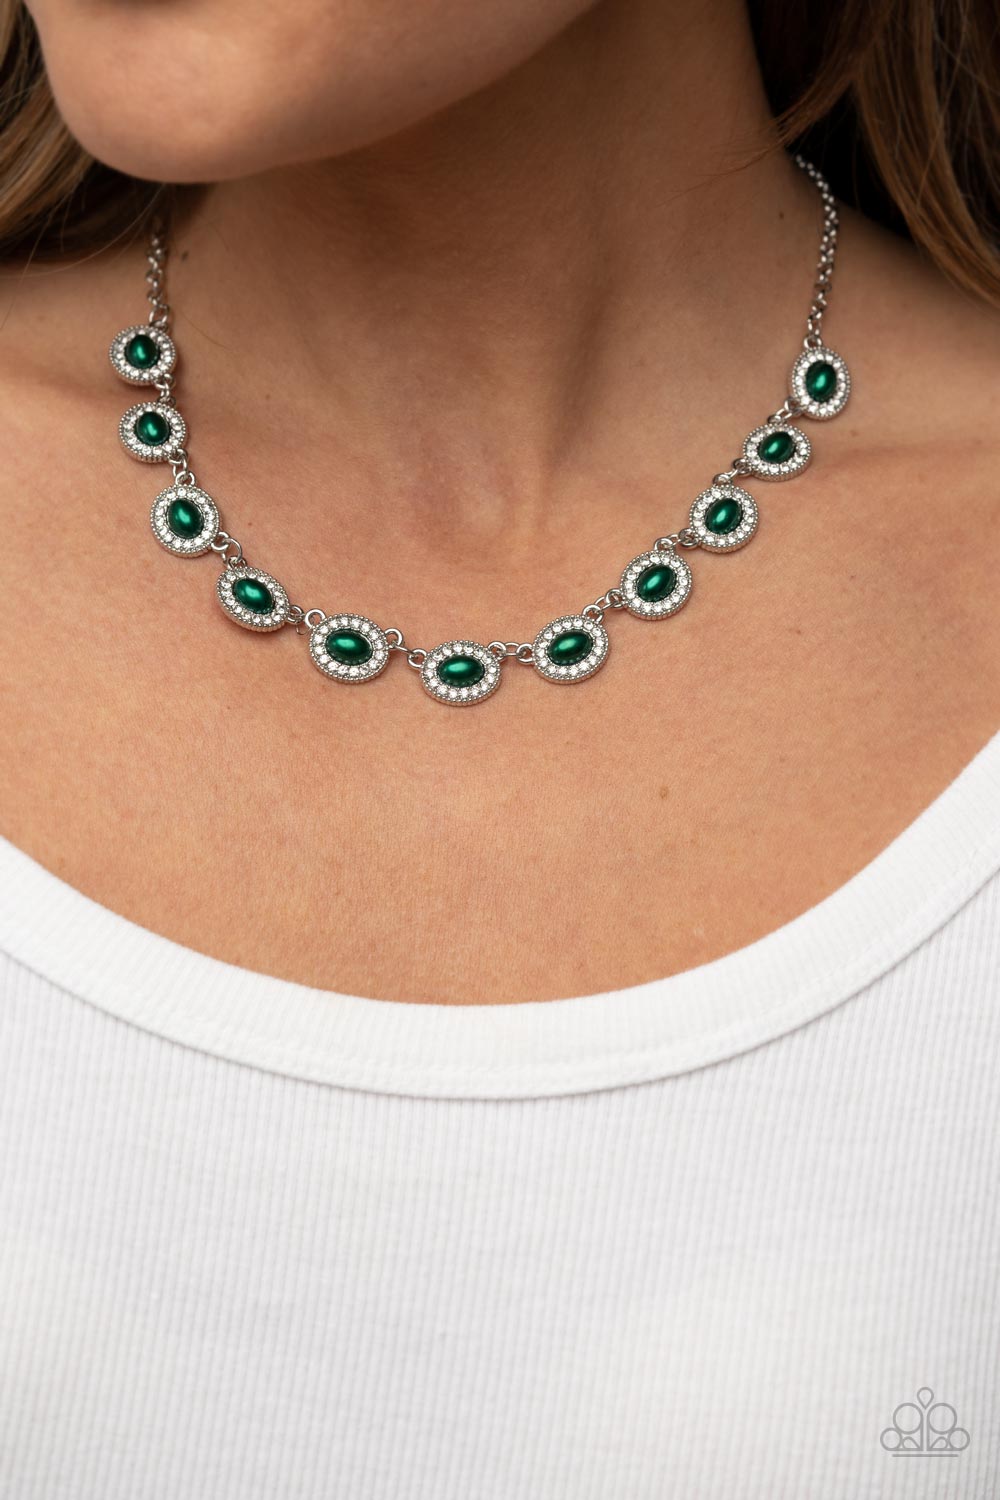 Modest Masterpiece - Green Pearl Necklace - Paparazzi Accessories - Encased in rings of glassy white rhinestones, oval Leprechaun pearl dotted frames delicately link into a twinkly display below the collar for a timeless fashion. Features an adjustable clasp closure. Sold as one individual necklace.